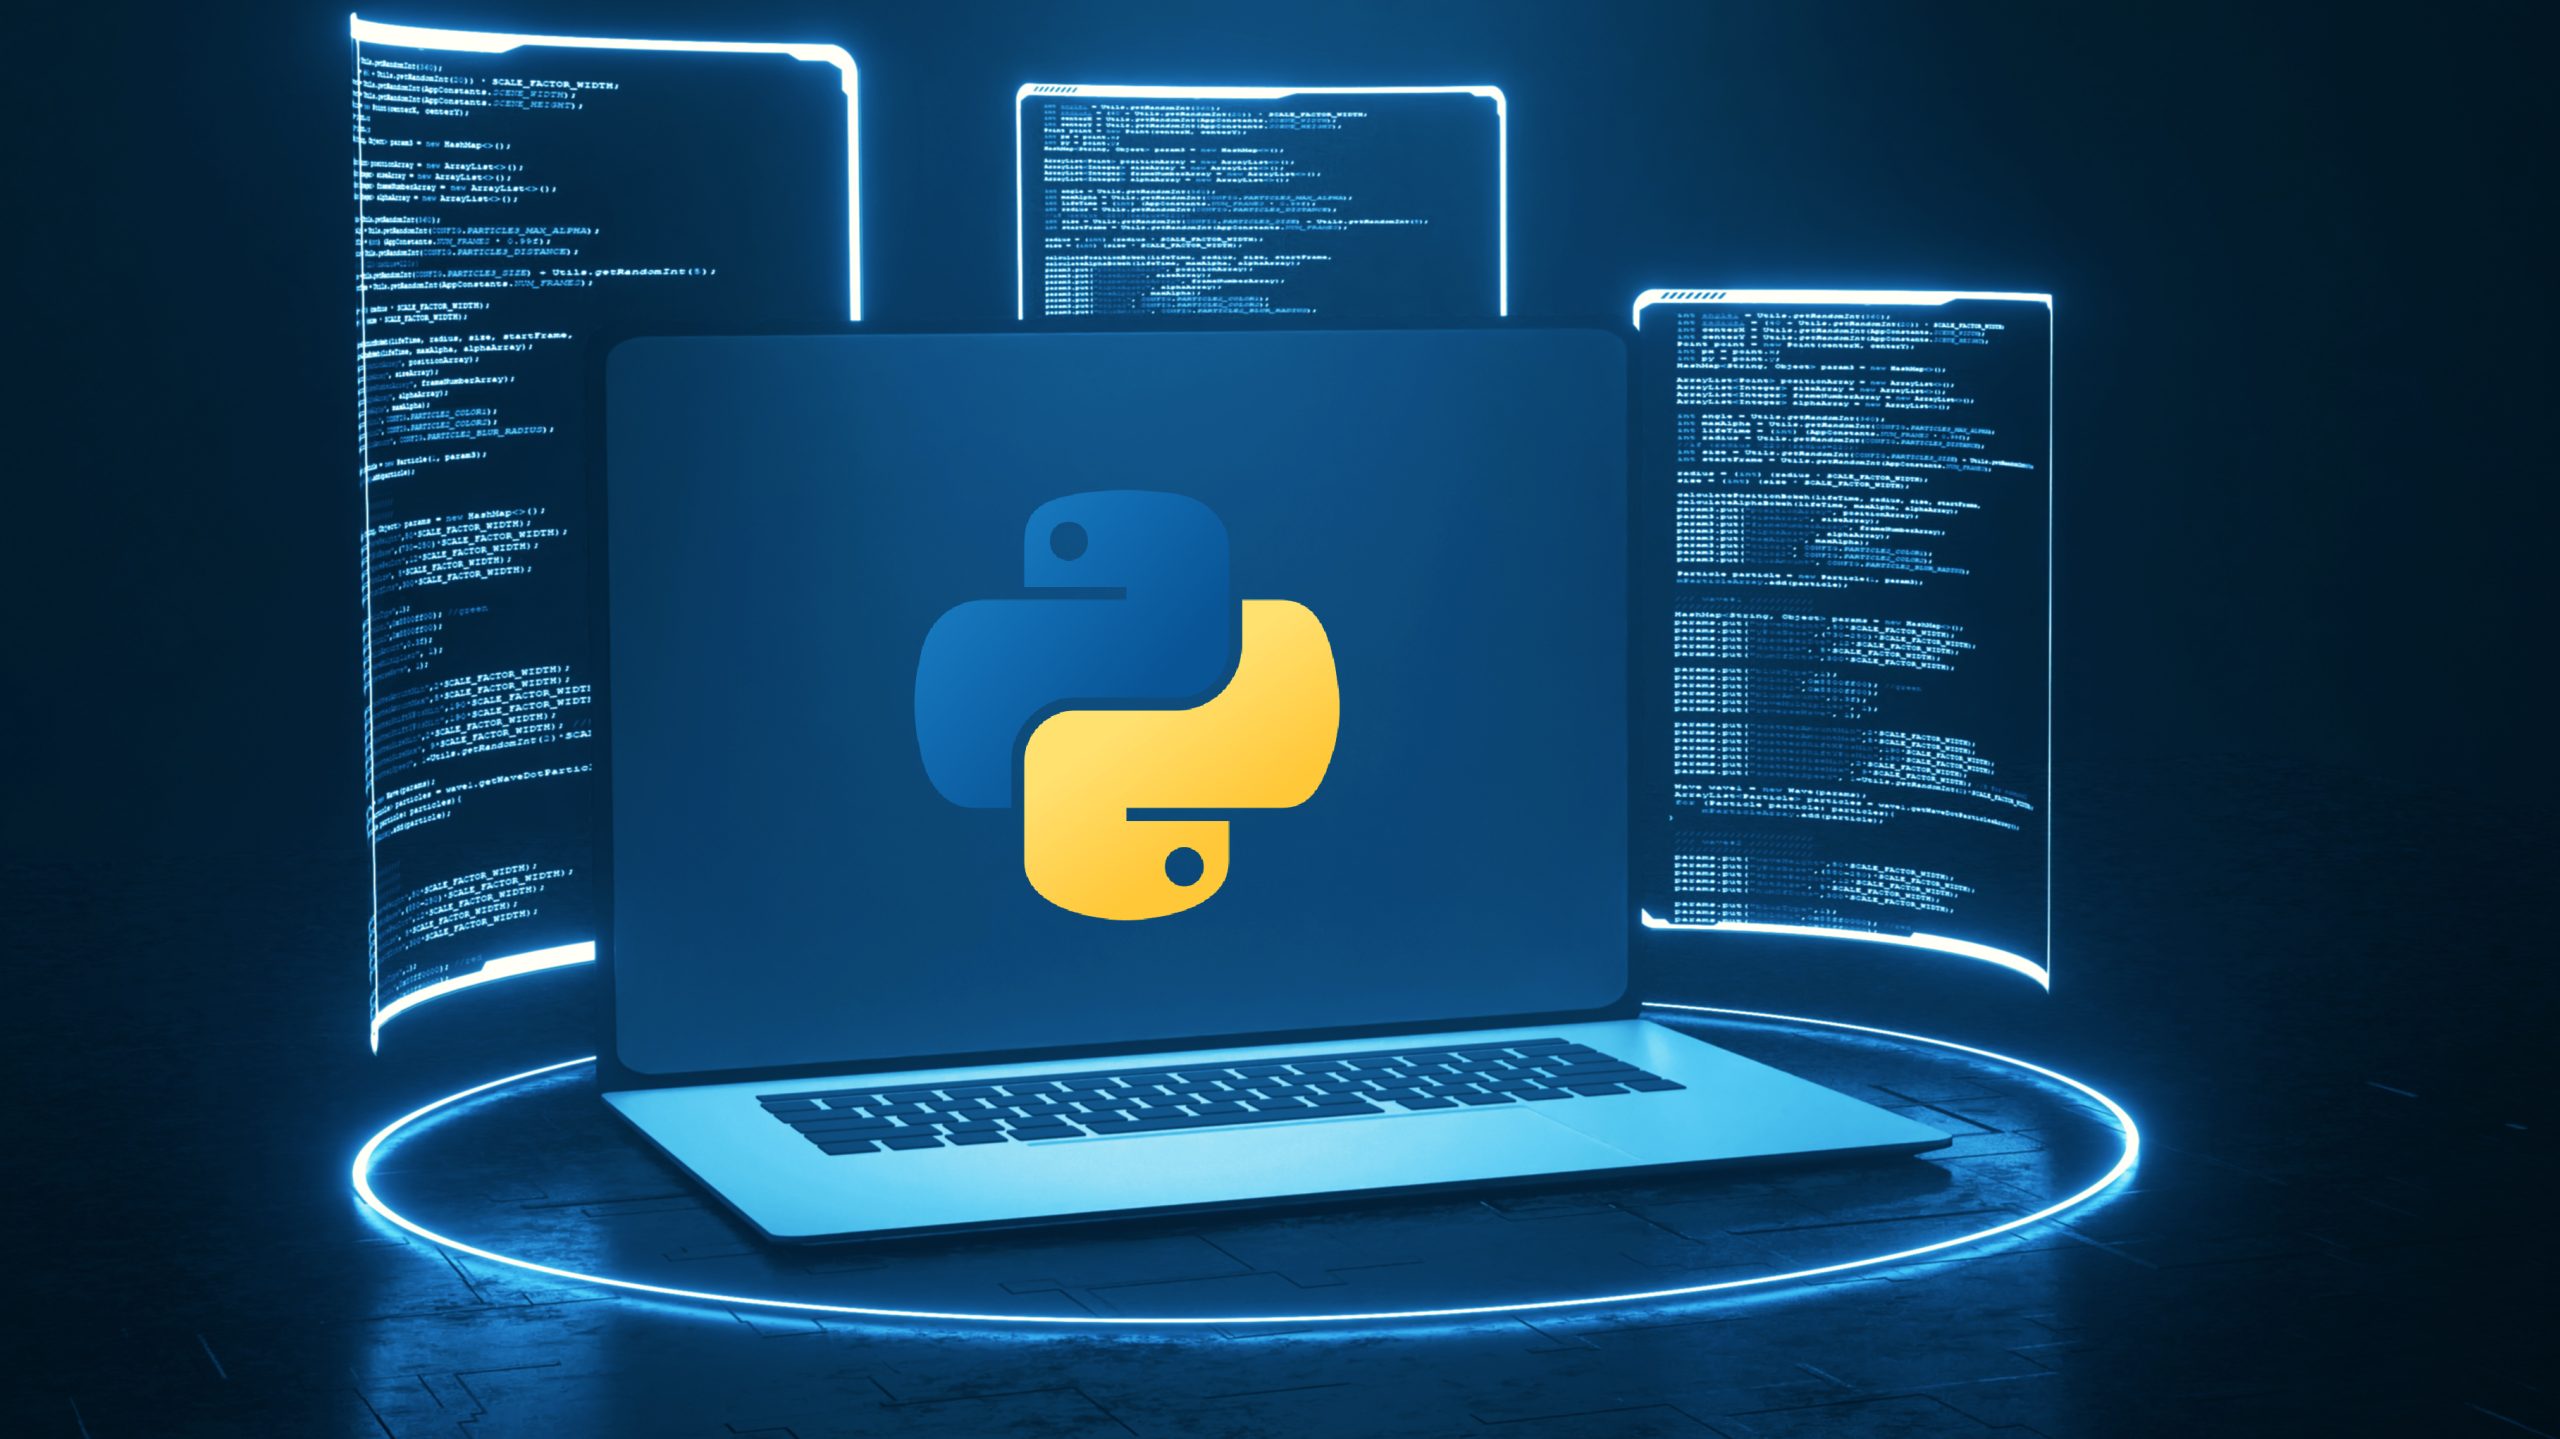 How to learn python?